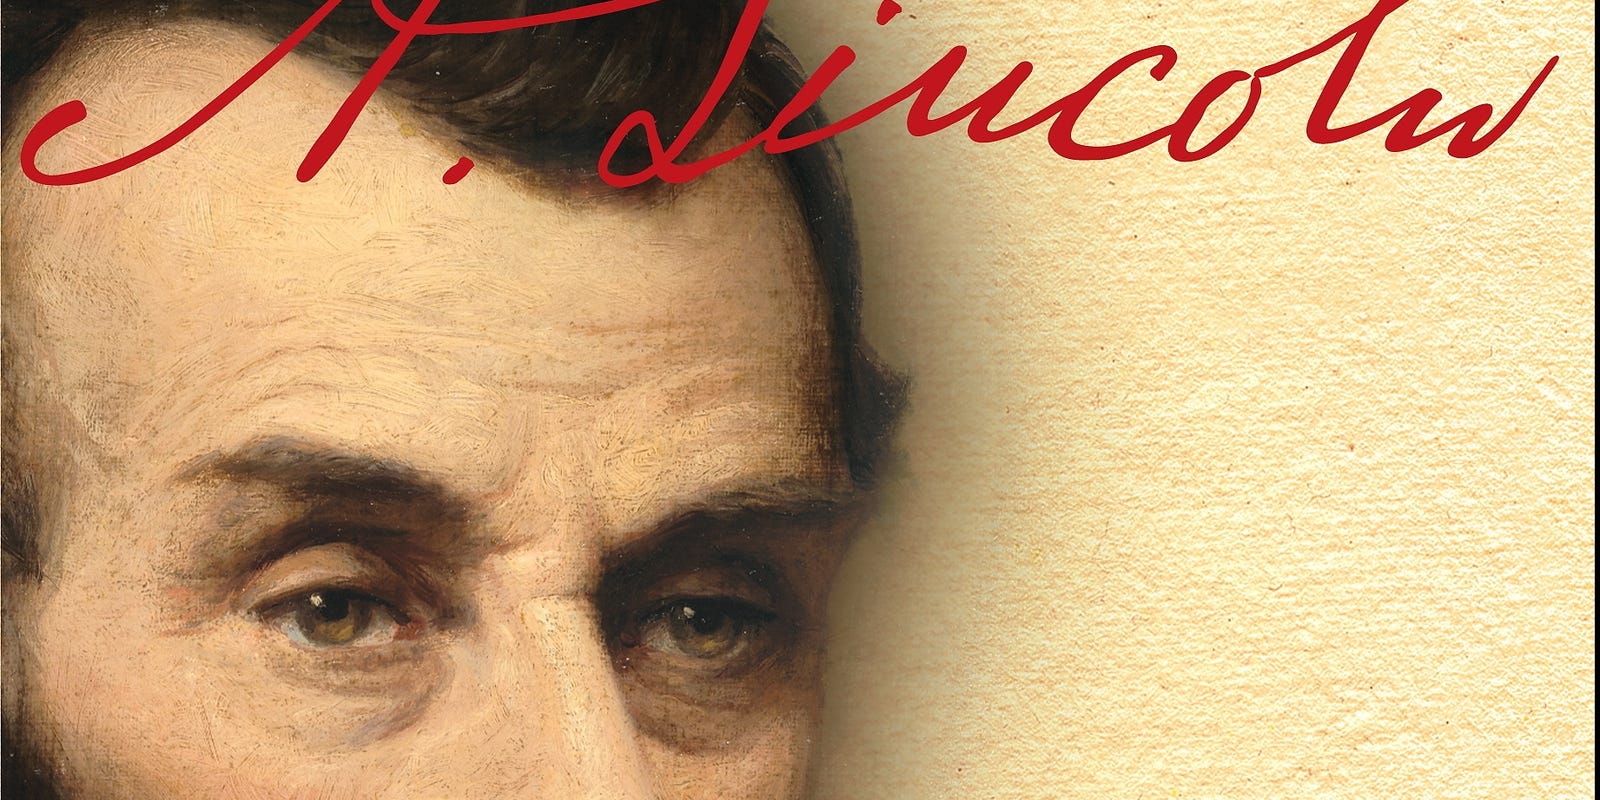 These books log Lincoln's life, presidency